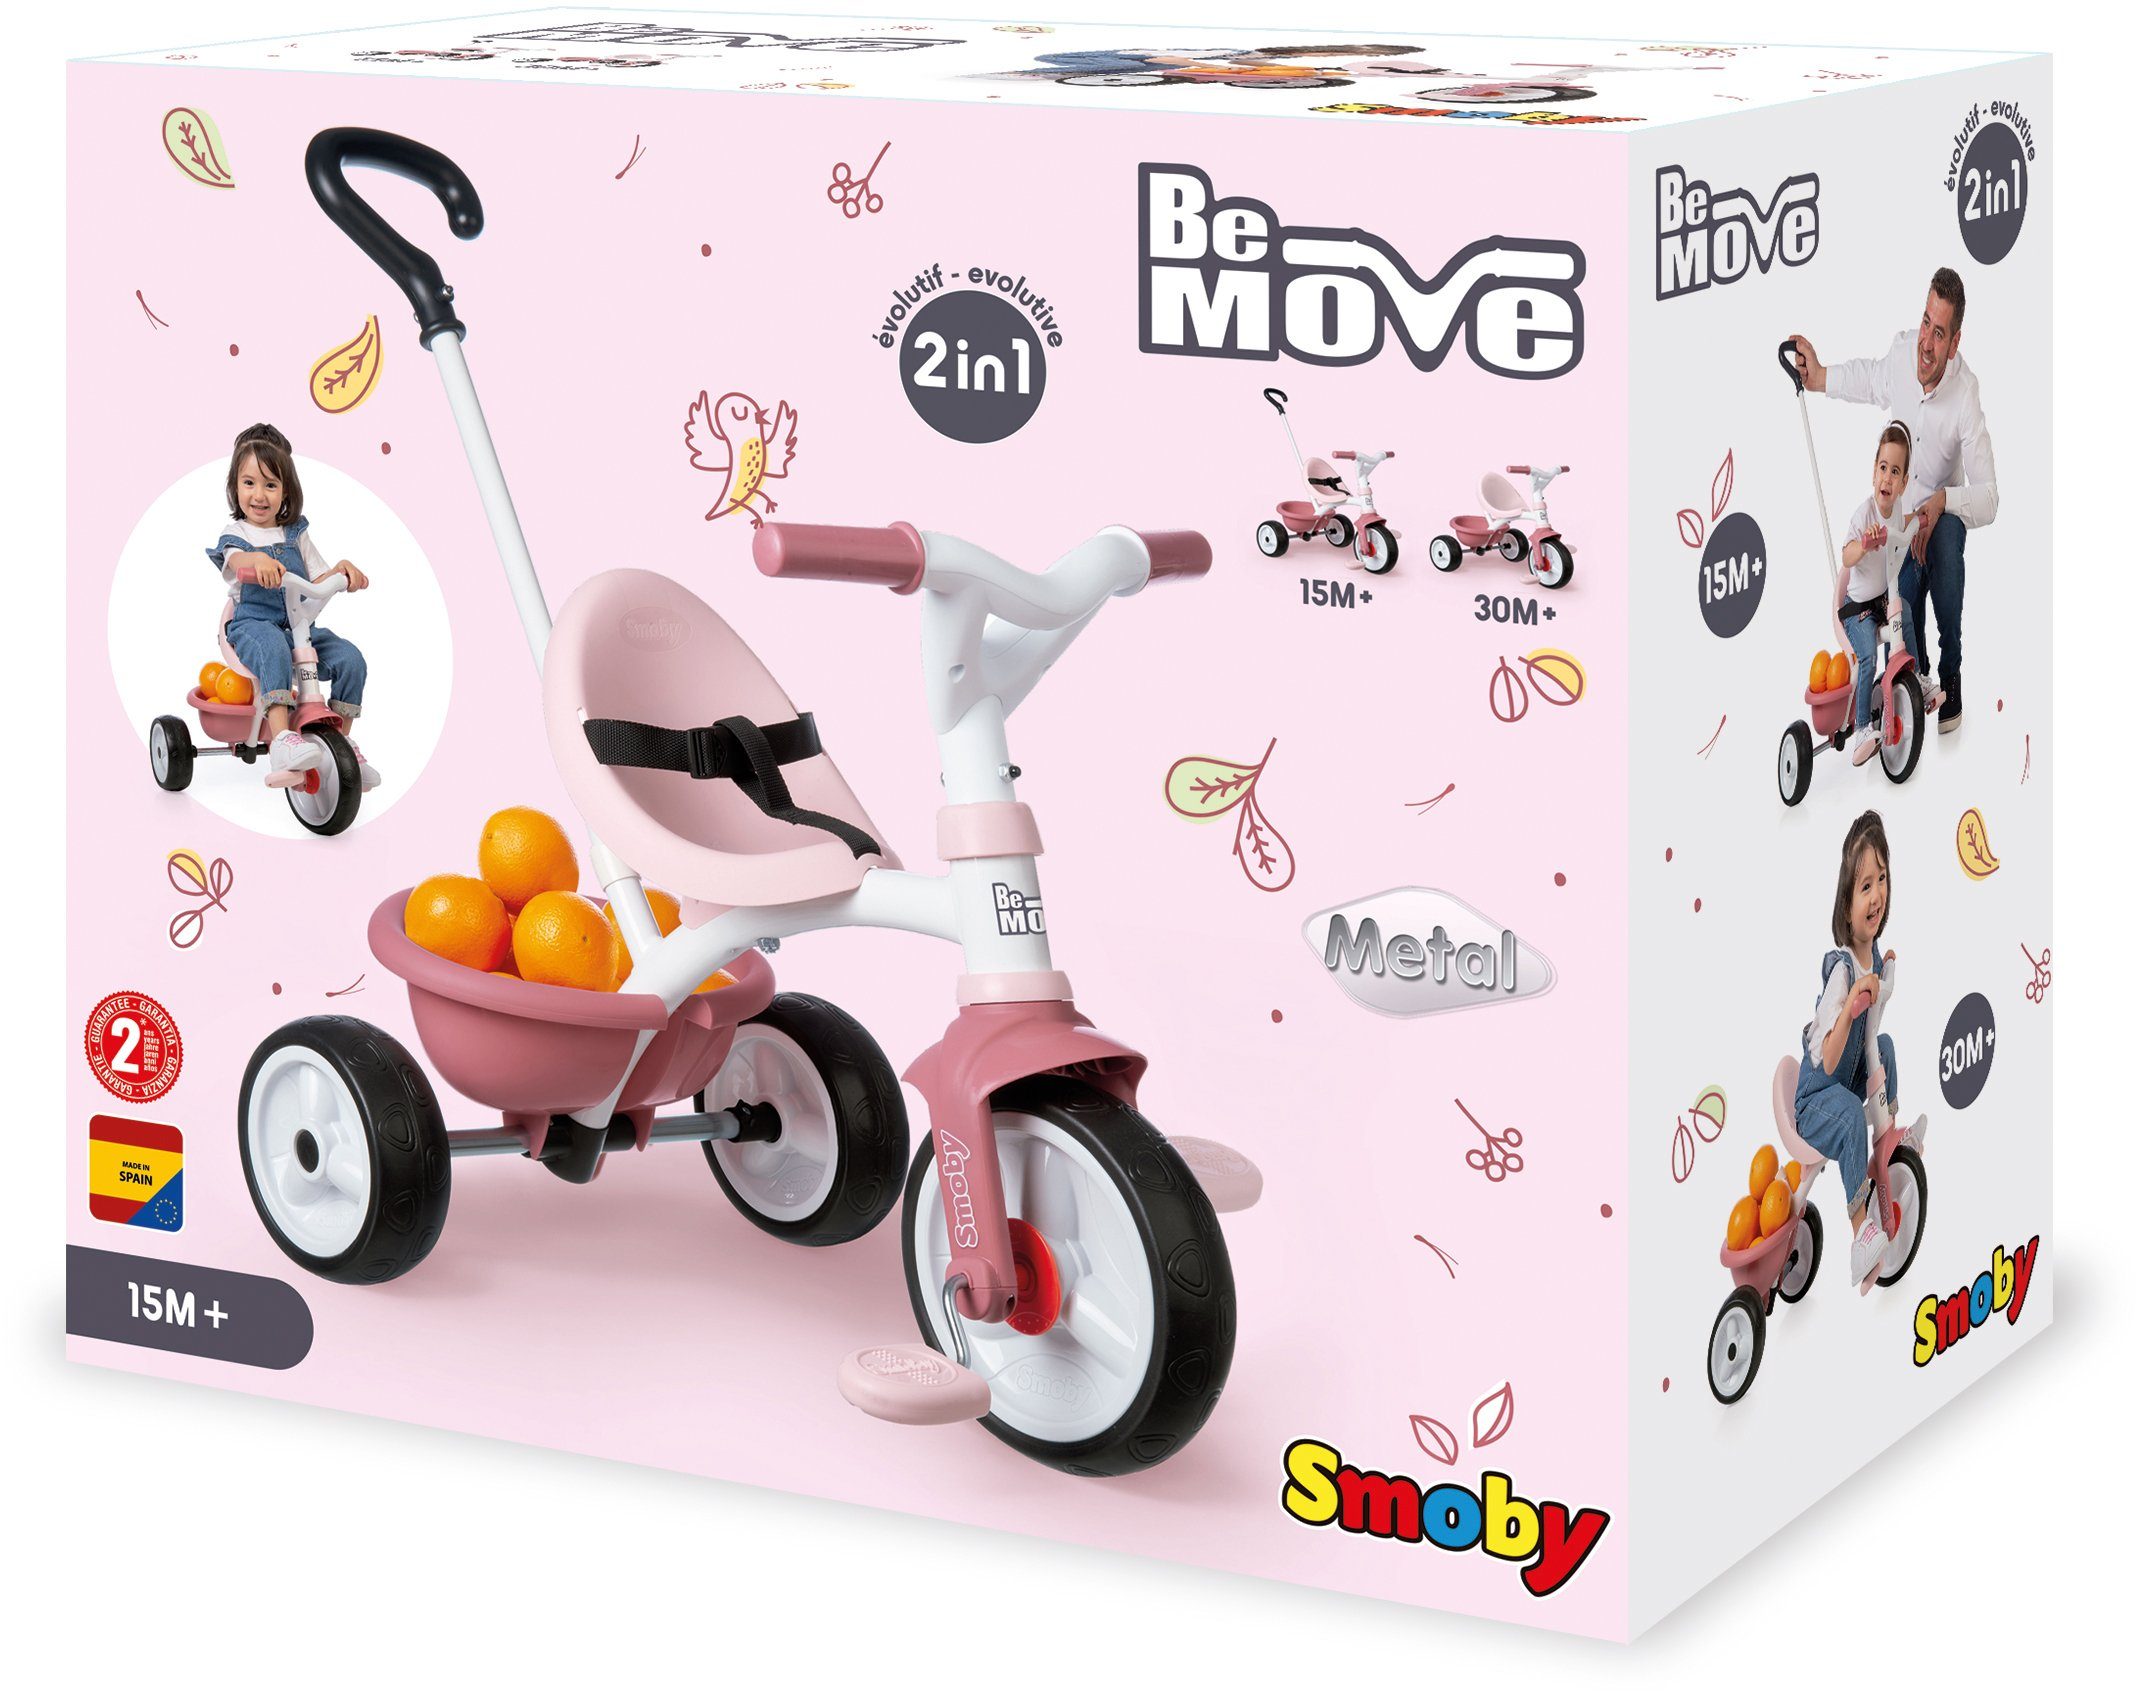 Made Dreirad Europe Be rosa, in Move, Smoby